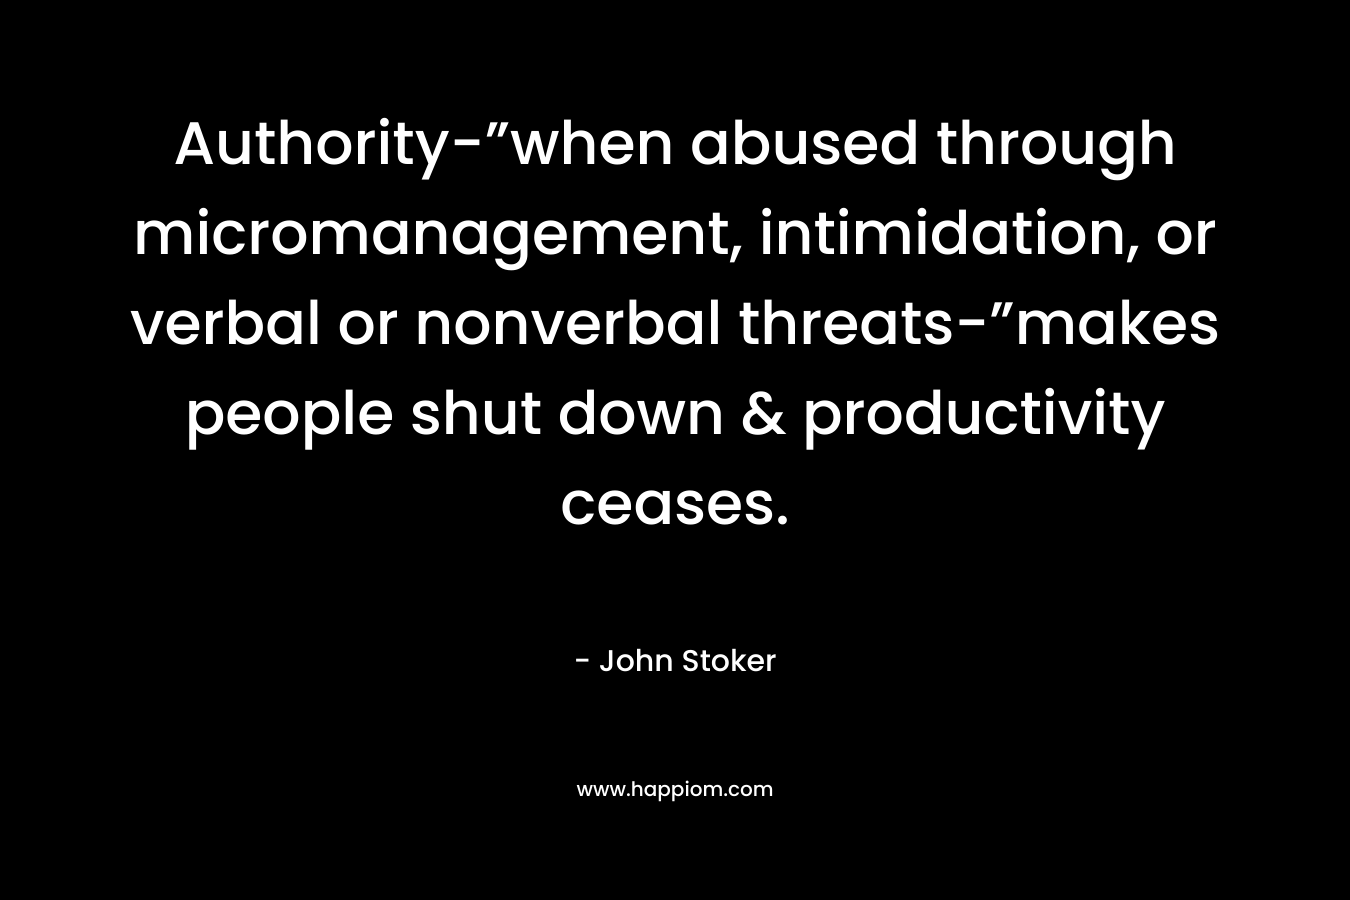 Authority-”when abused through micromanagement, intimidation, or verbal or nonverbal threats-”makes people shut down & productivity ceases.